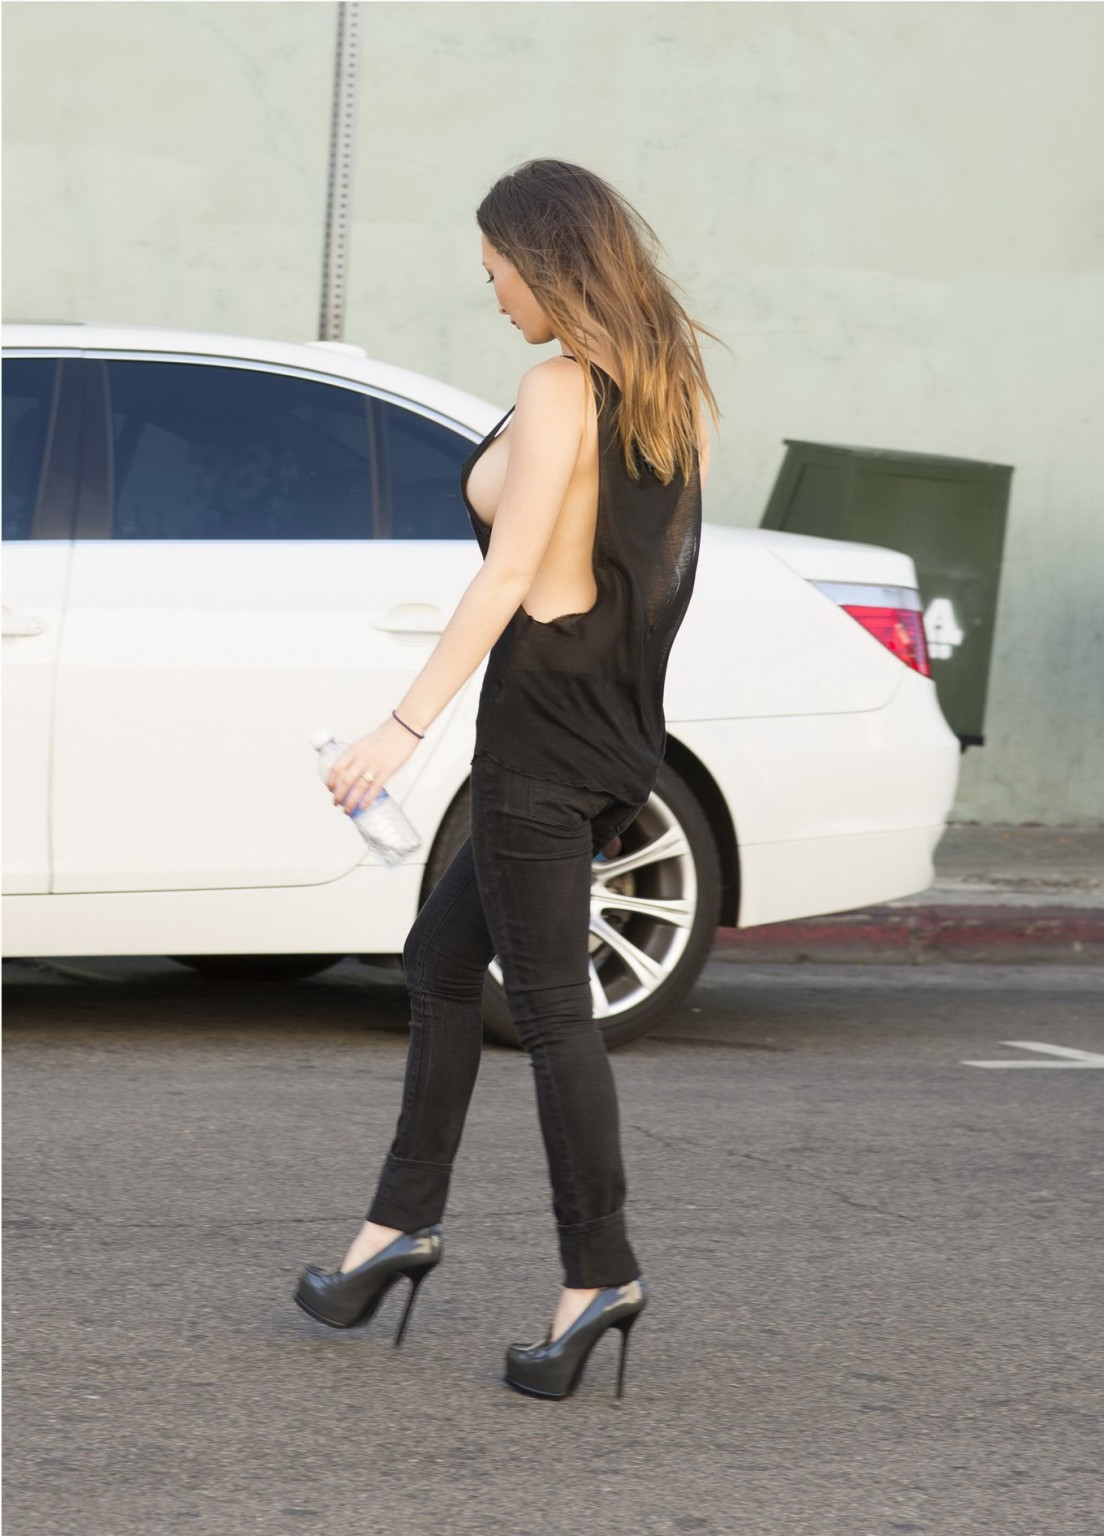 Amy Markham braless wearing black loose tank top while crossing the street in LA #75218063